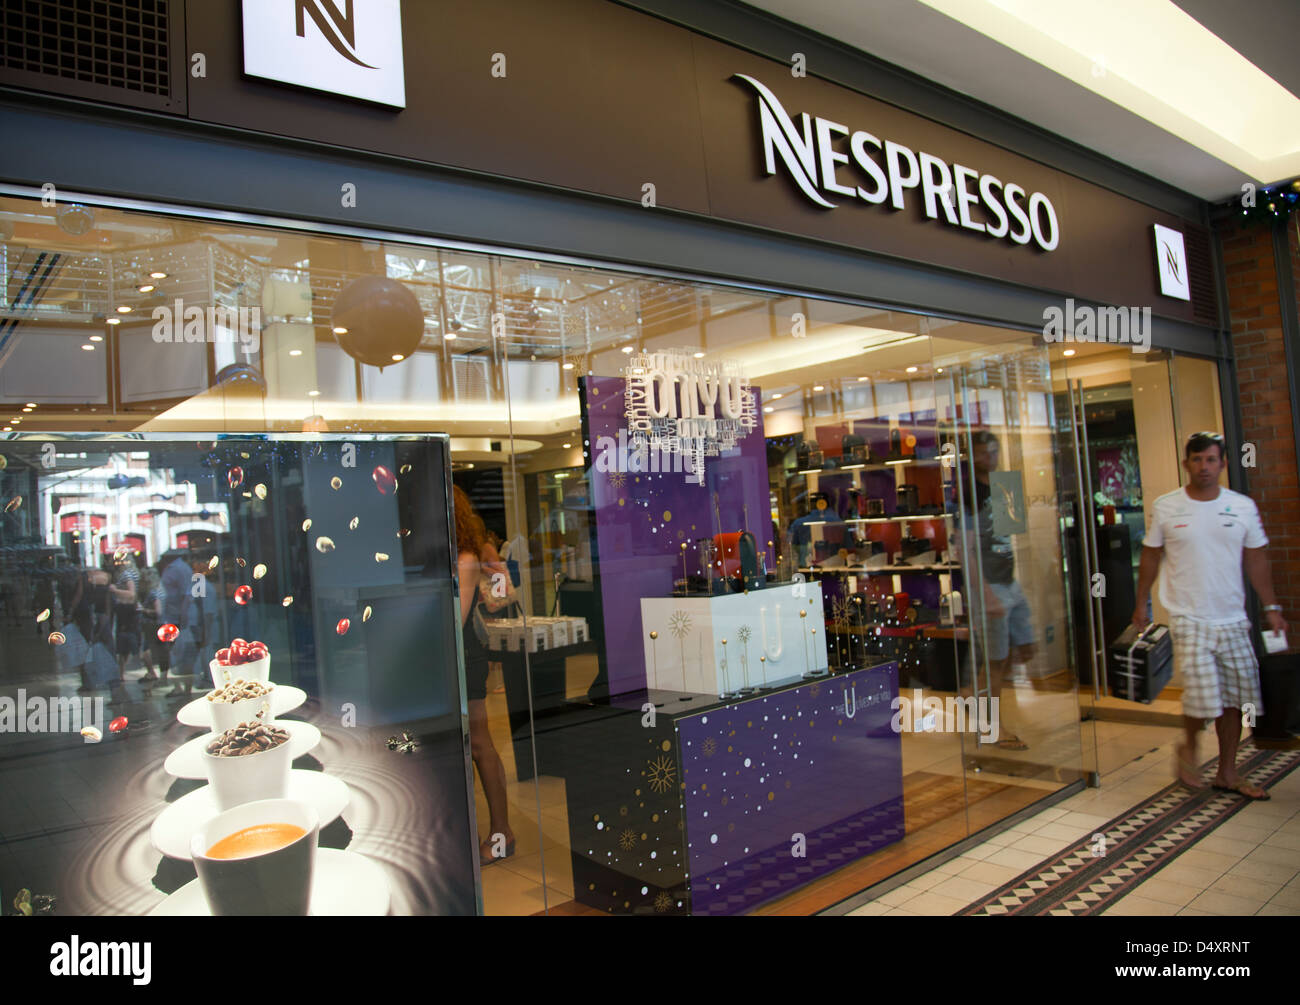 Nespresso Store High Resolution Stock Photography and Images - Alamy